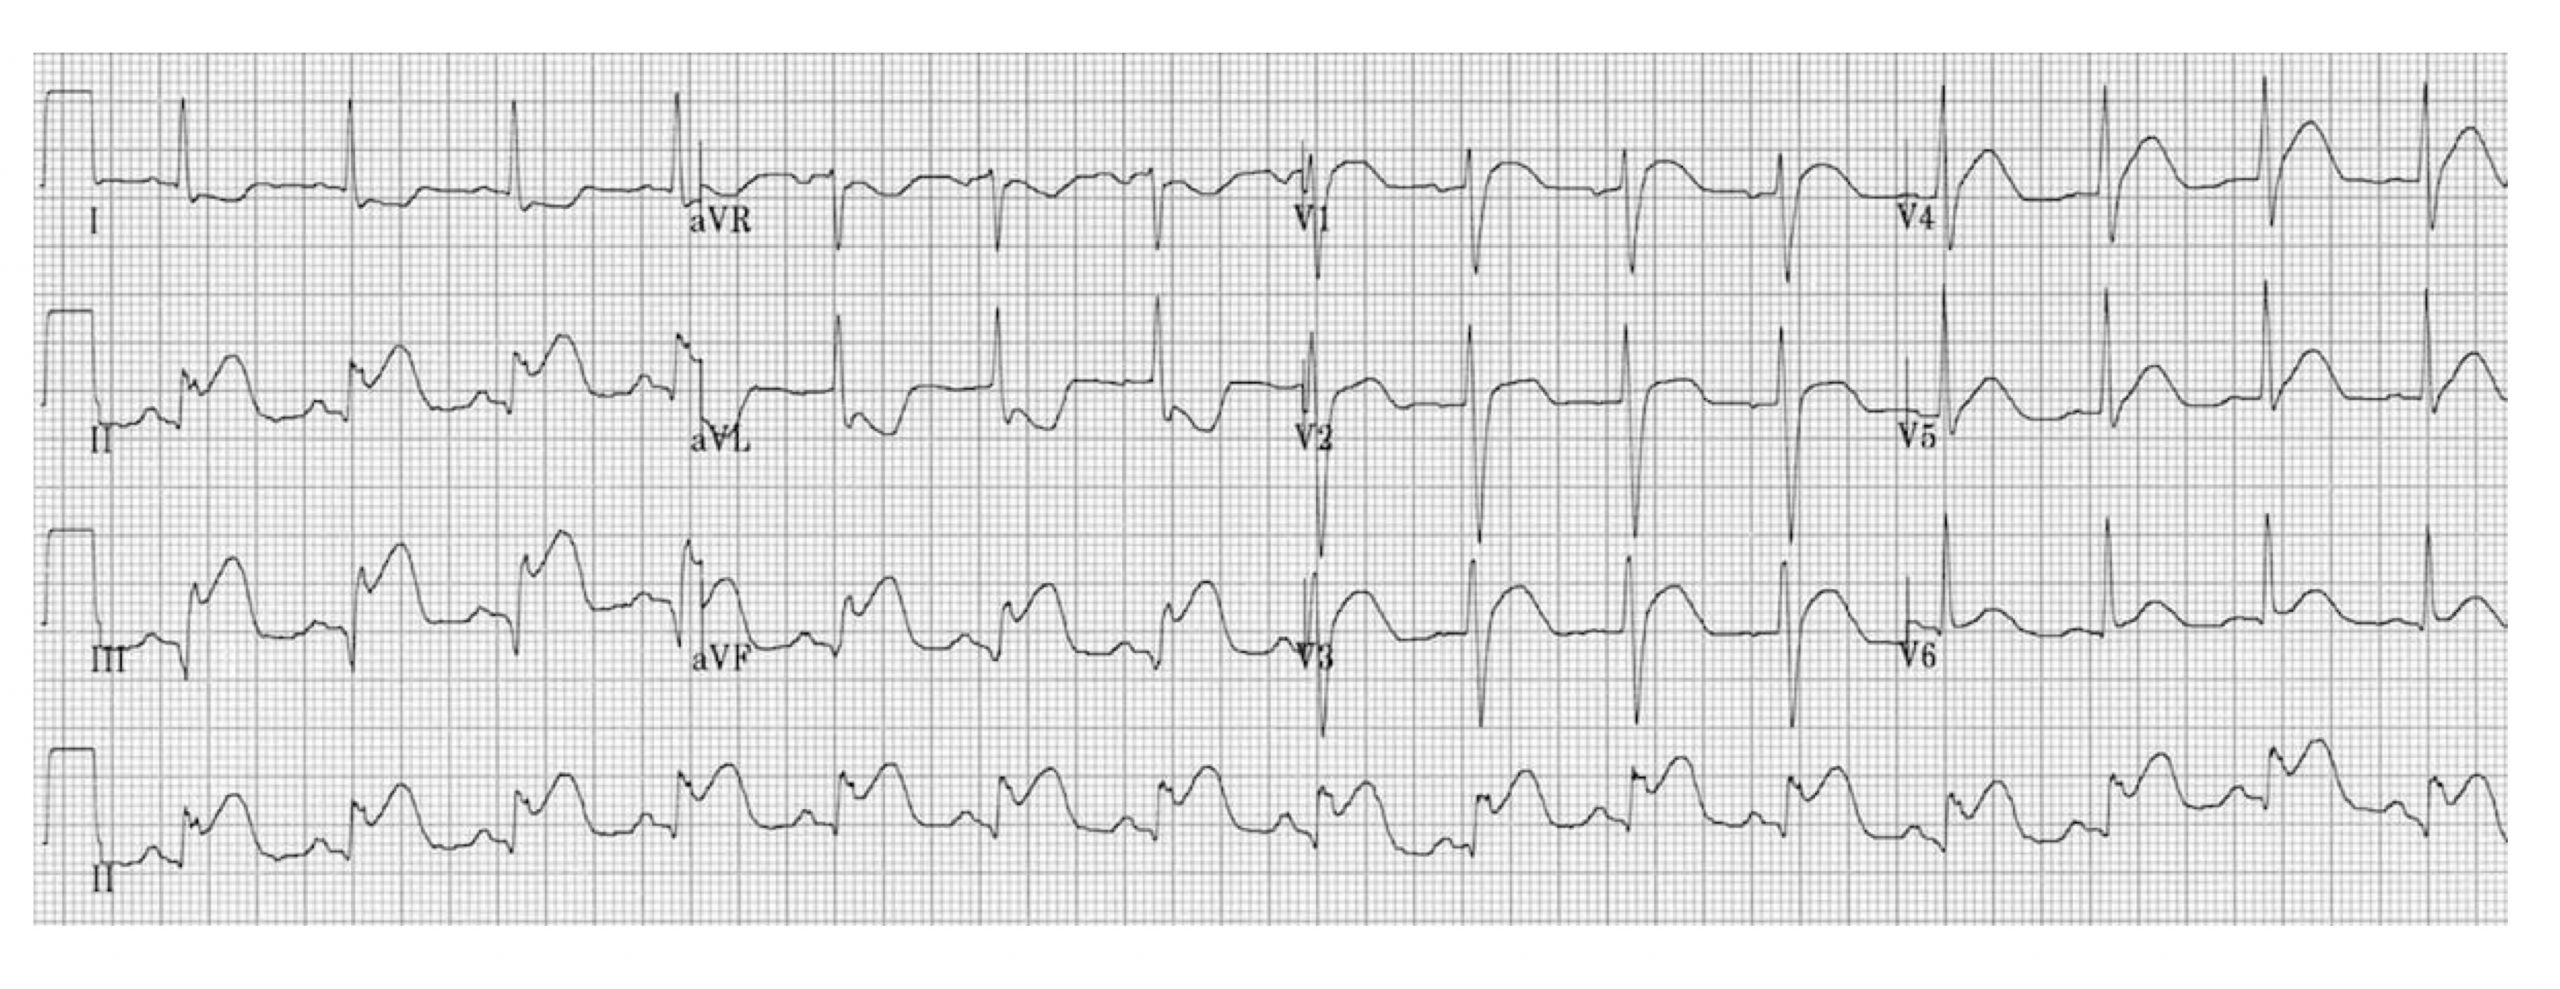 All leads of a 12-lead ECG are shown to illustrate the consequences of an inferior wall MI. There is prominent S-T elevation in leads 2, 3 and aVF. The S-T segment is lowered than the isoelectric baseline in lead aVL.